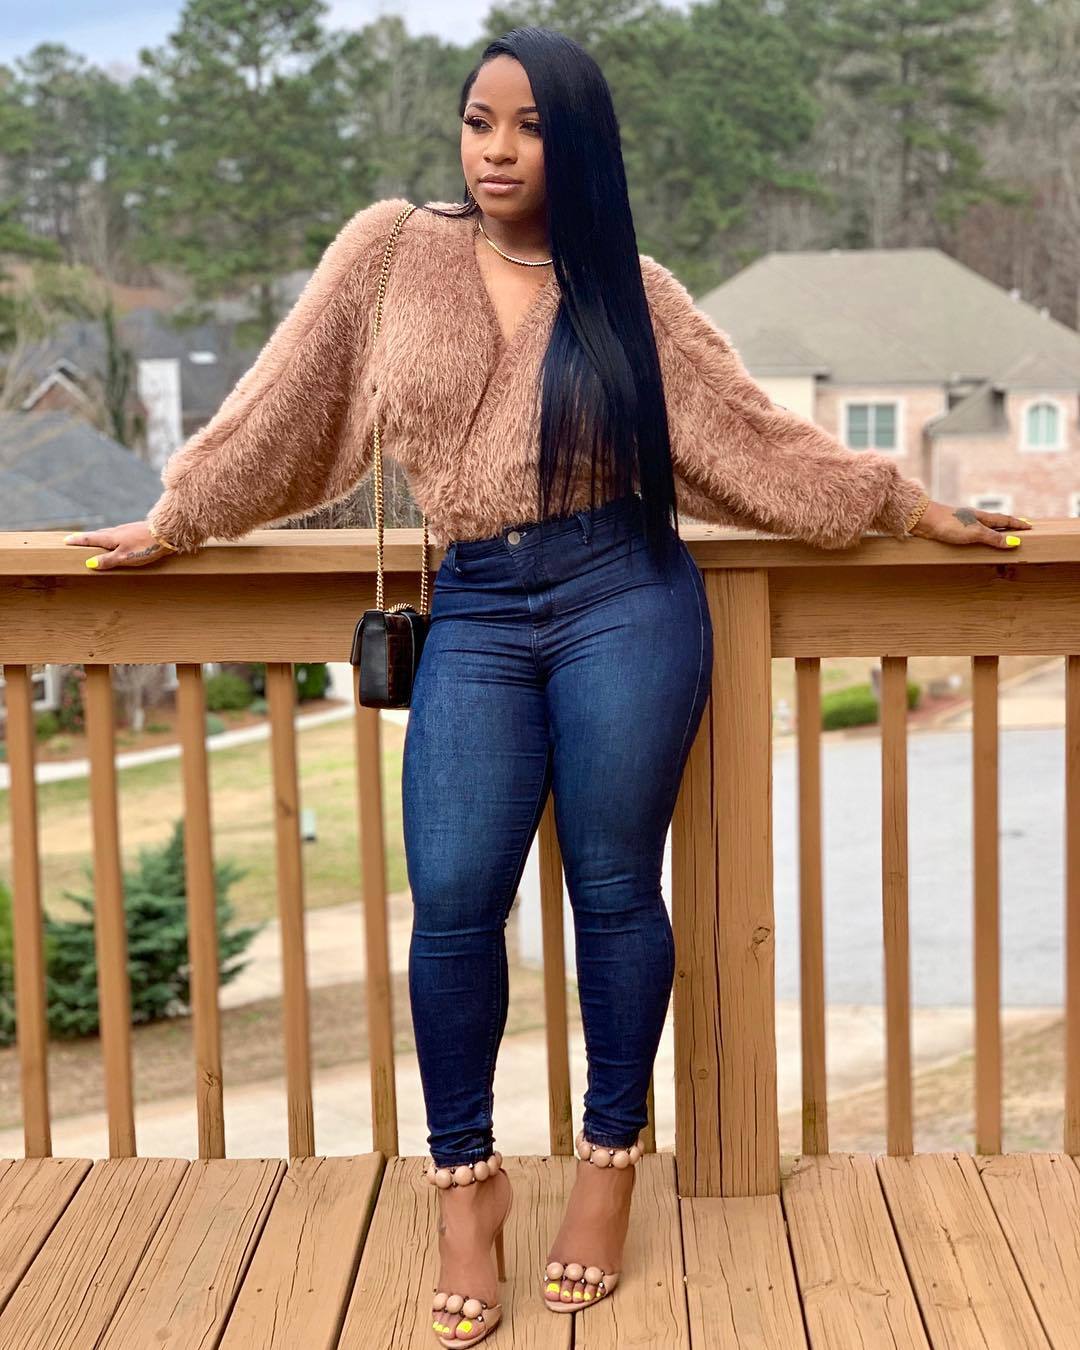 Toya Wright Shares Some Pics From The Ultimate Women's Expo In Houston - She Posed With A.C Slater From 'Saved By The Bell'